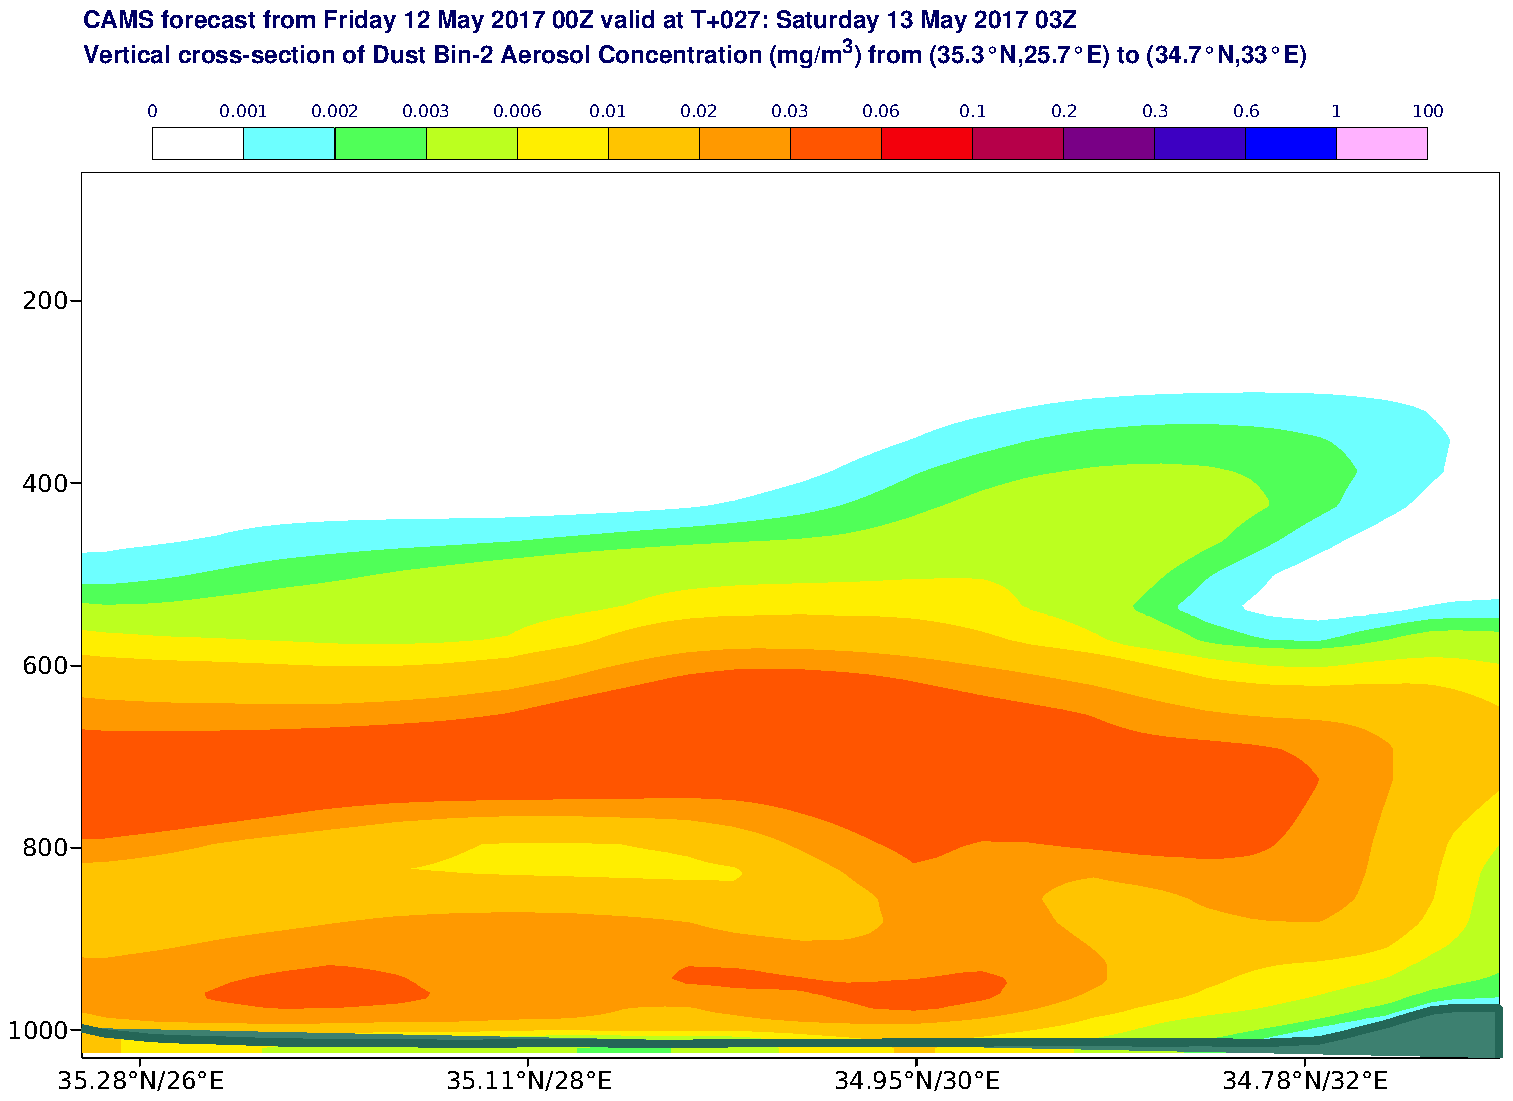 Vertical cross-section of Dust Bin-2 Aerosol Concentration (mg/m3) valid at T27 - 2017-05-13 03:00